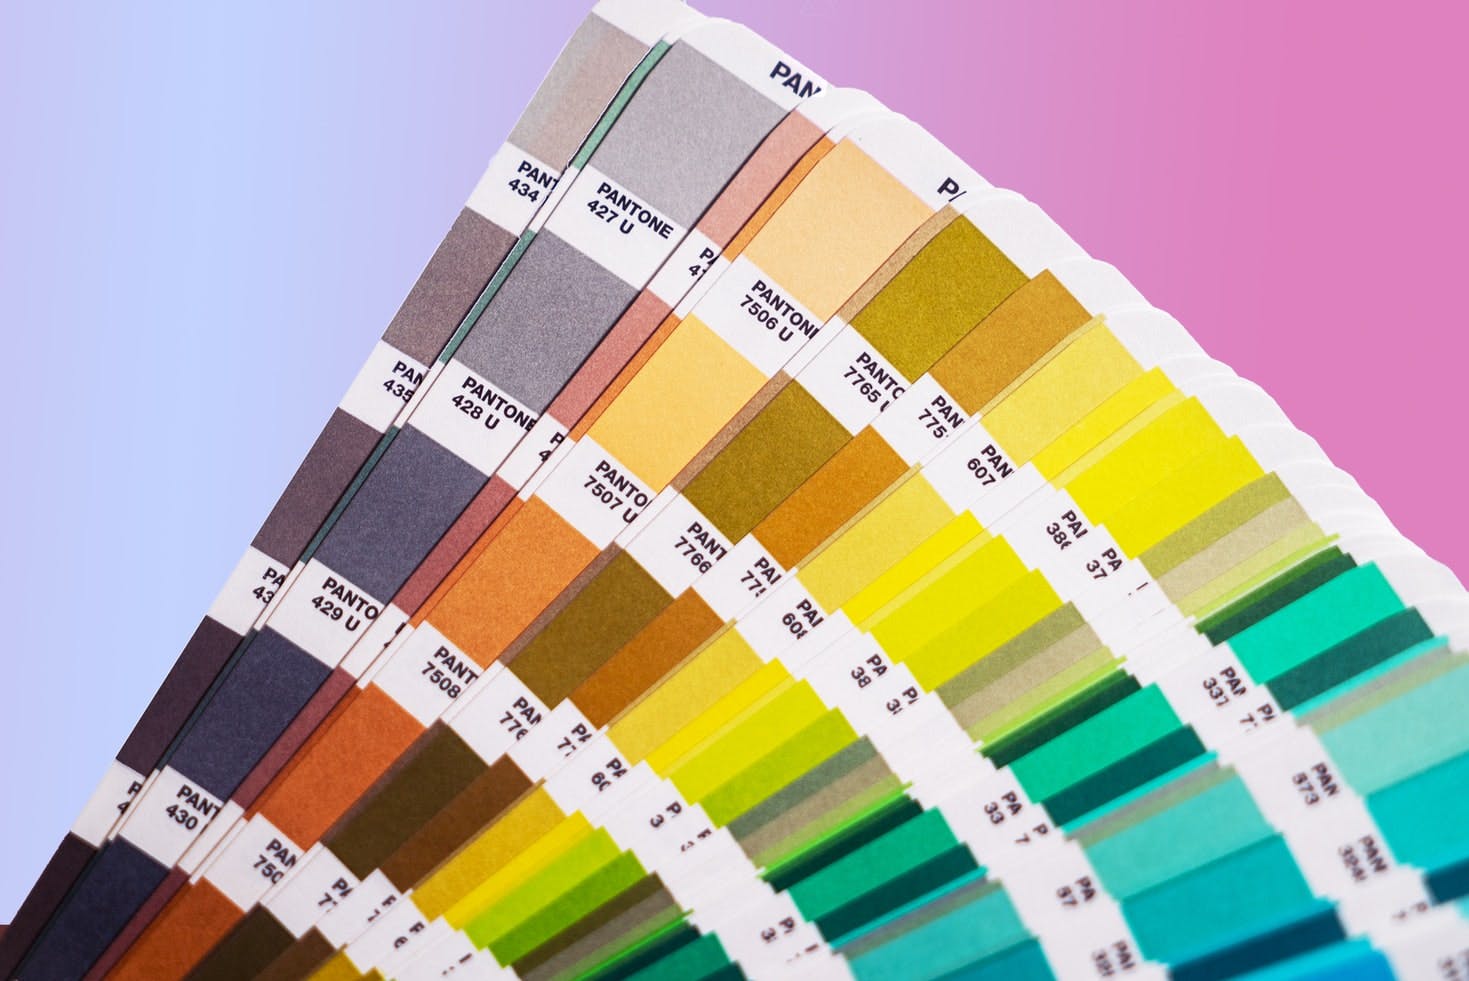 How Did the 2023 Pantone Color of the Year Show Up in Book Design? 20  Inspiring Examples - The Book Designer